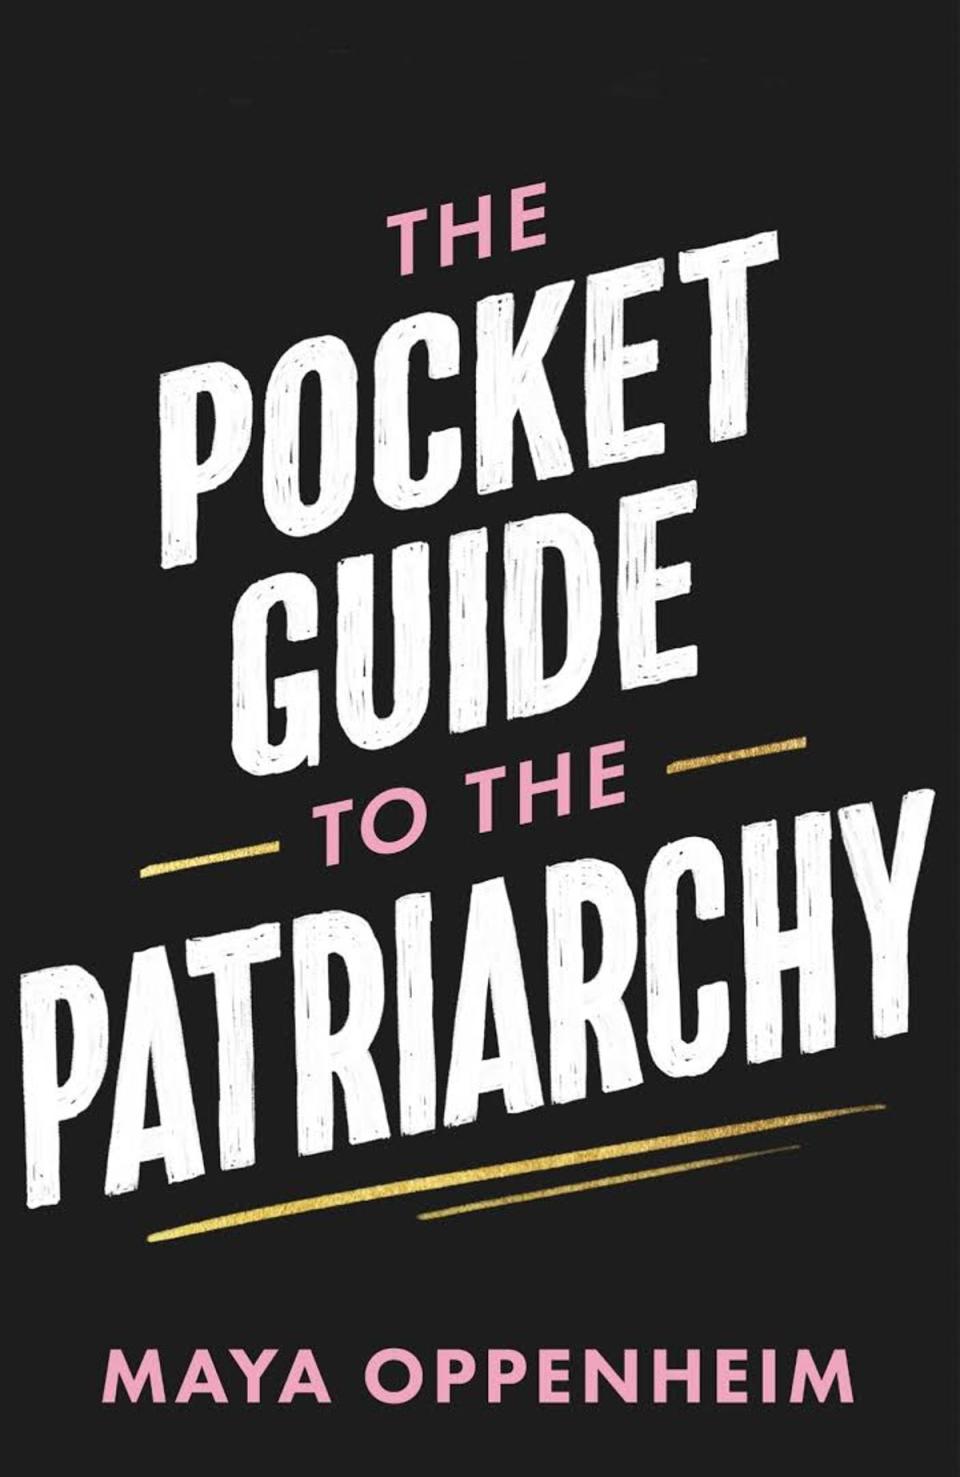 Maya Oppenheim’s ‘The Pocket Guide to the Patriarchy’ (Hatchette)